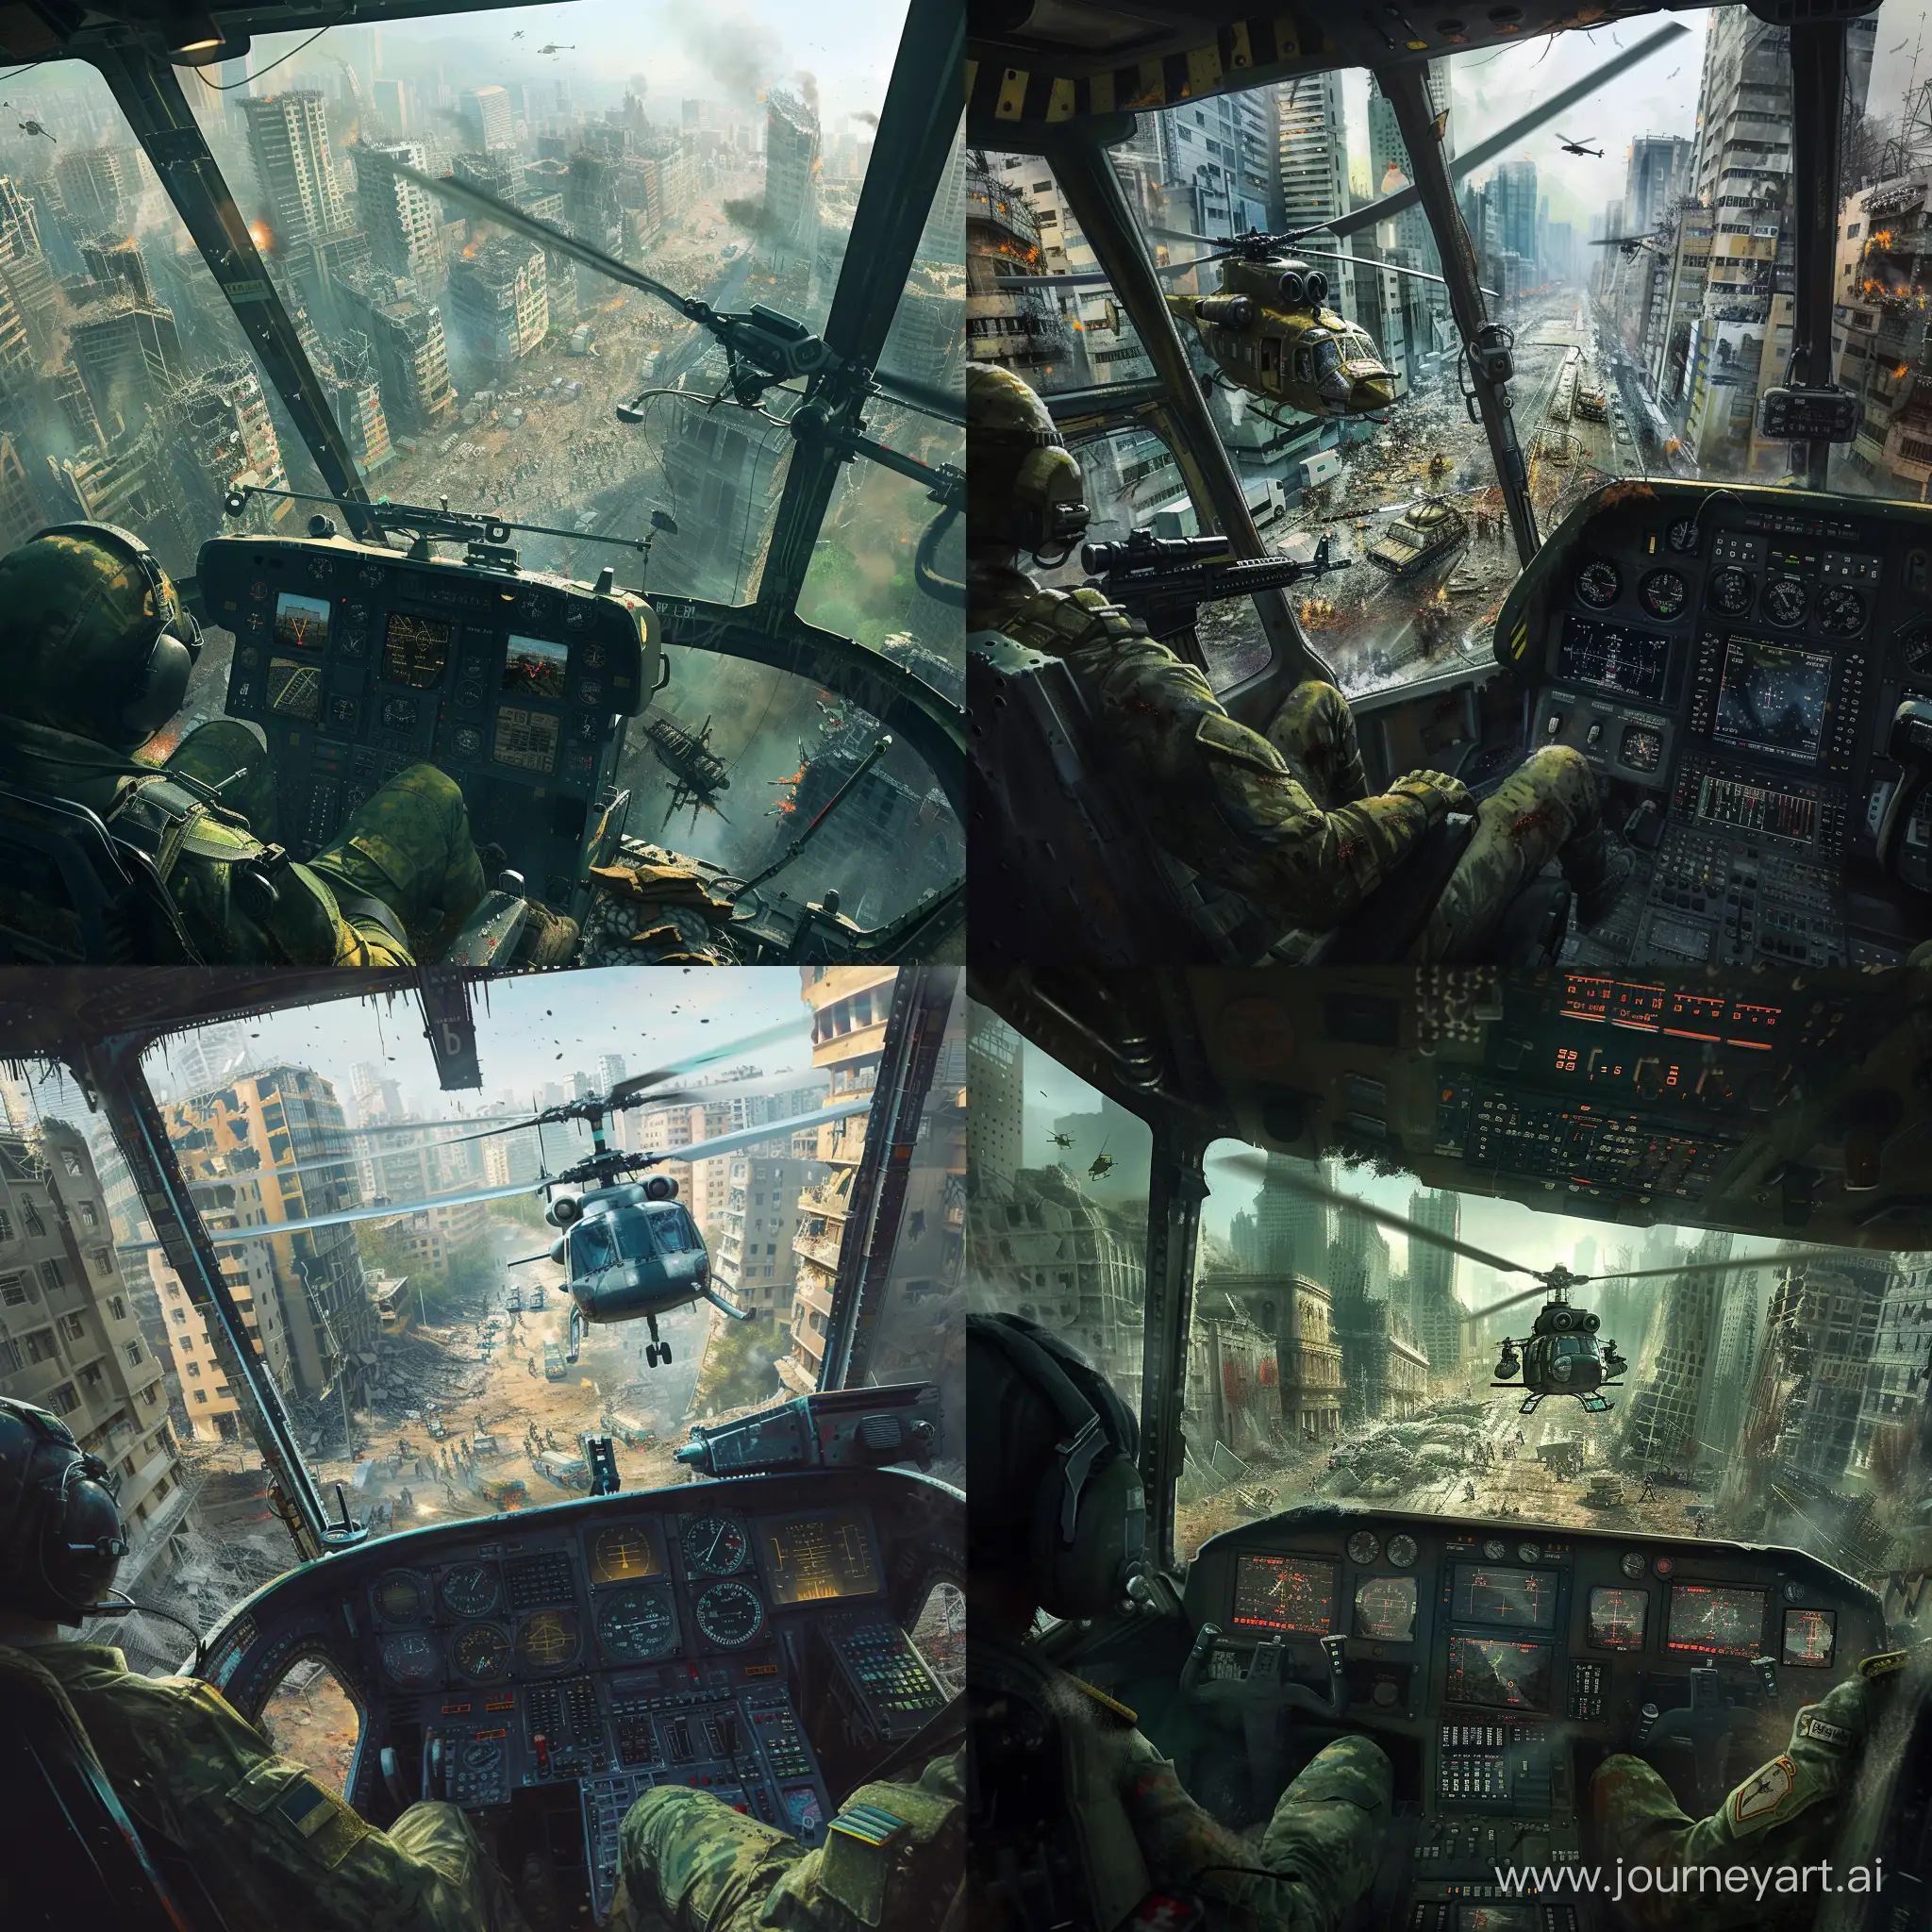 Urban-Apocalypse-Soldiers-Defending-Against-Zombies-from-Helicopter-Cockpit-View